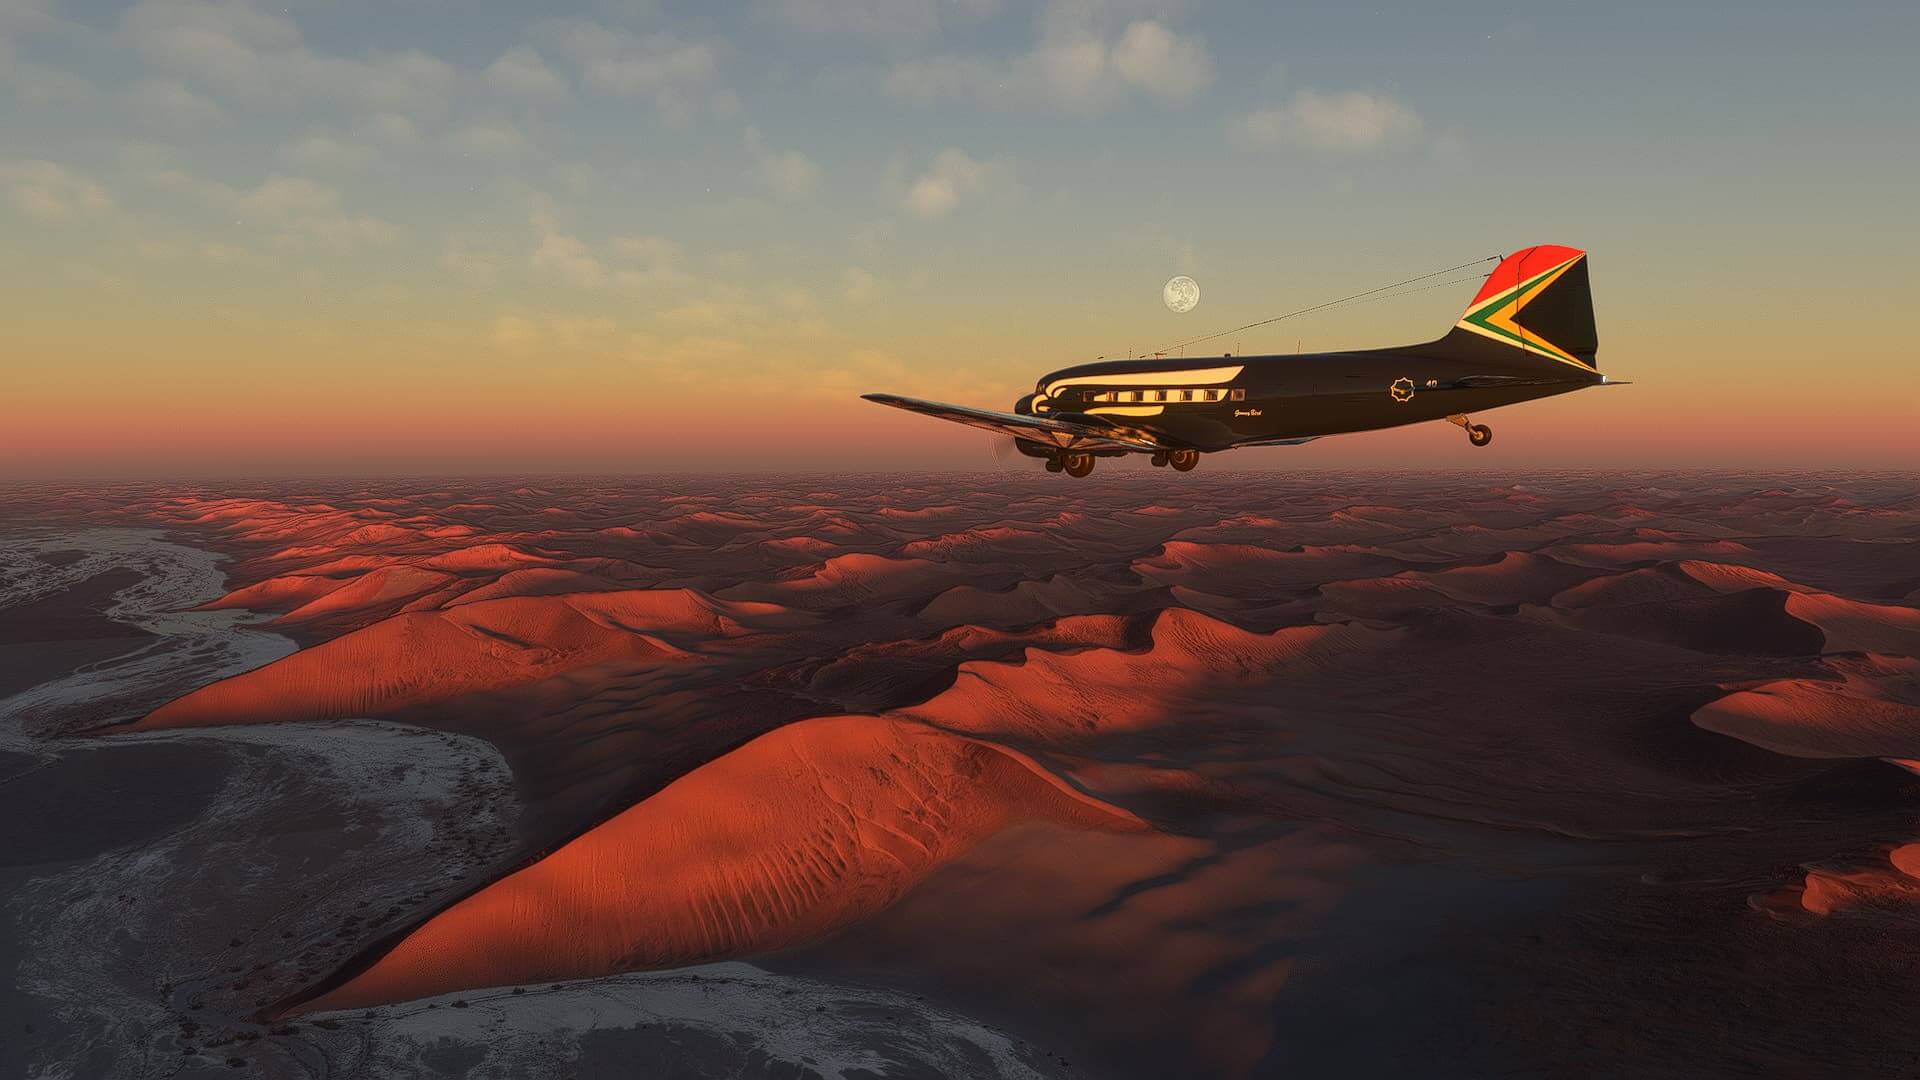 A DC-3 cruises high above sandy dunes with the sunset casting light on the fuselage.